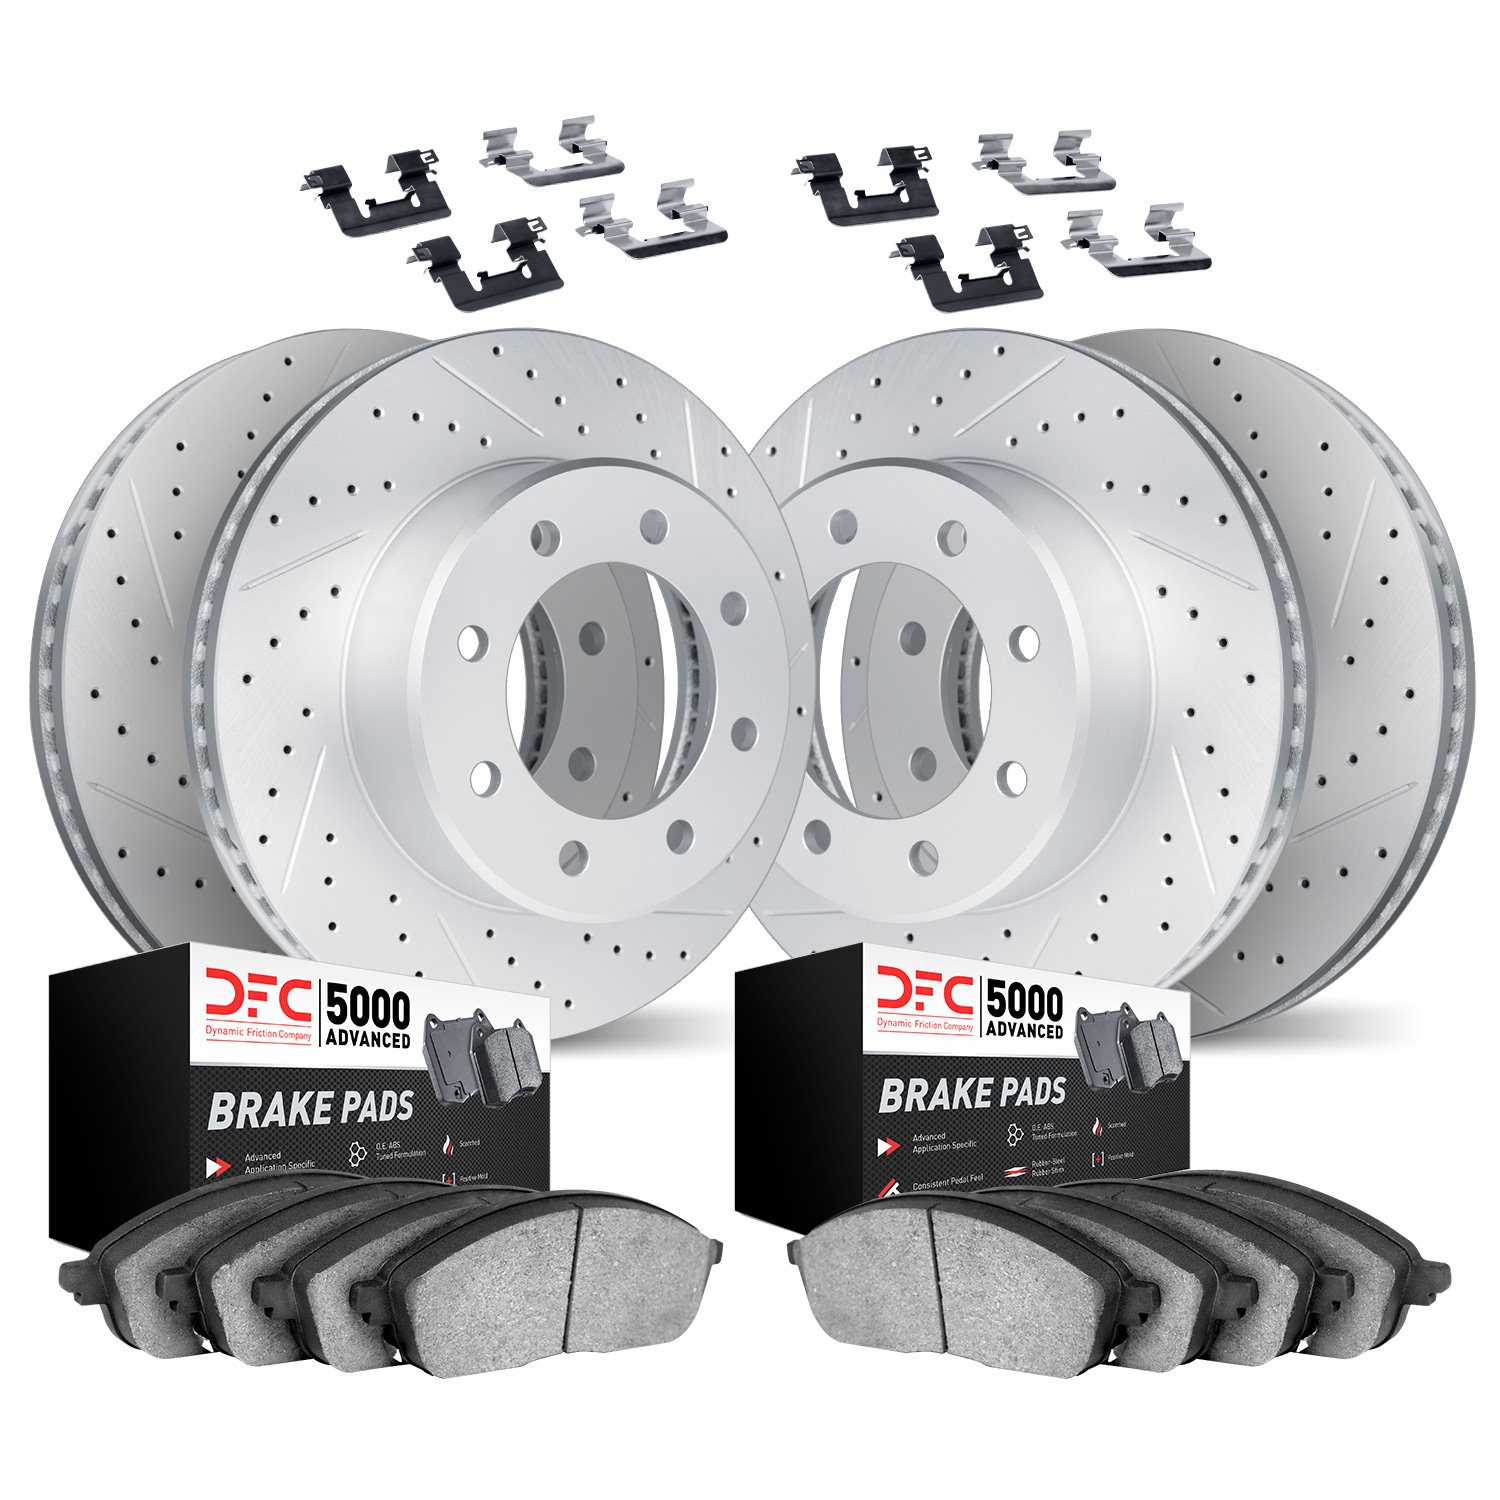 2514-48016 Geoperformance Drilled/Slotted Rotors w/5000 Advanced Brake Pads Kit & Hardware, 2005-2017 GM, Position: Front and Re